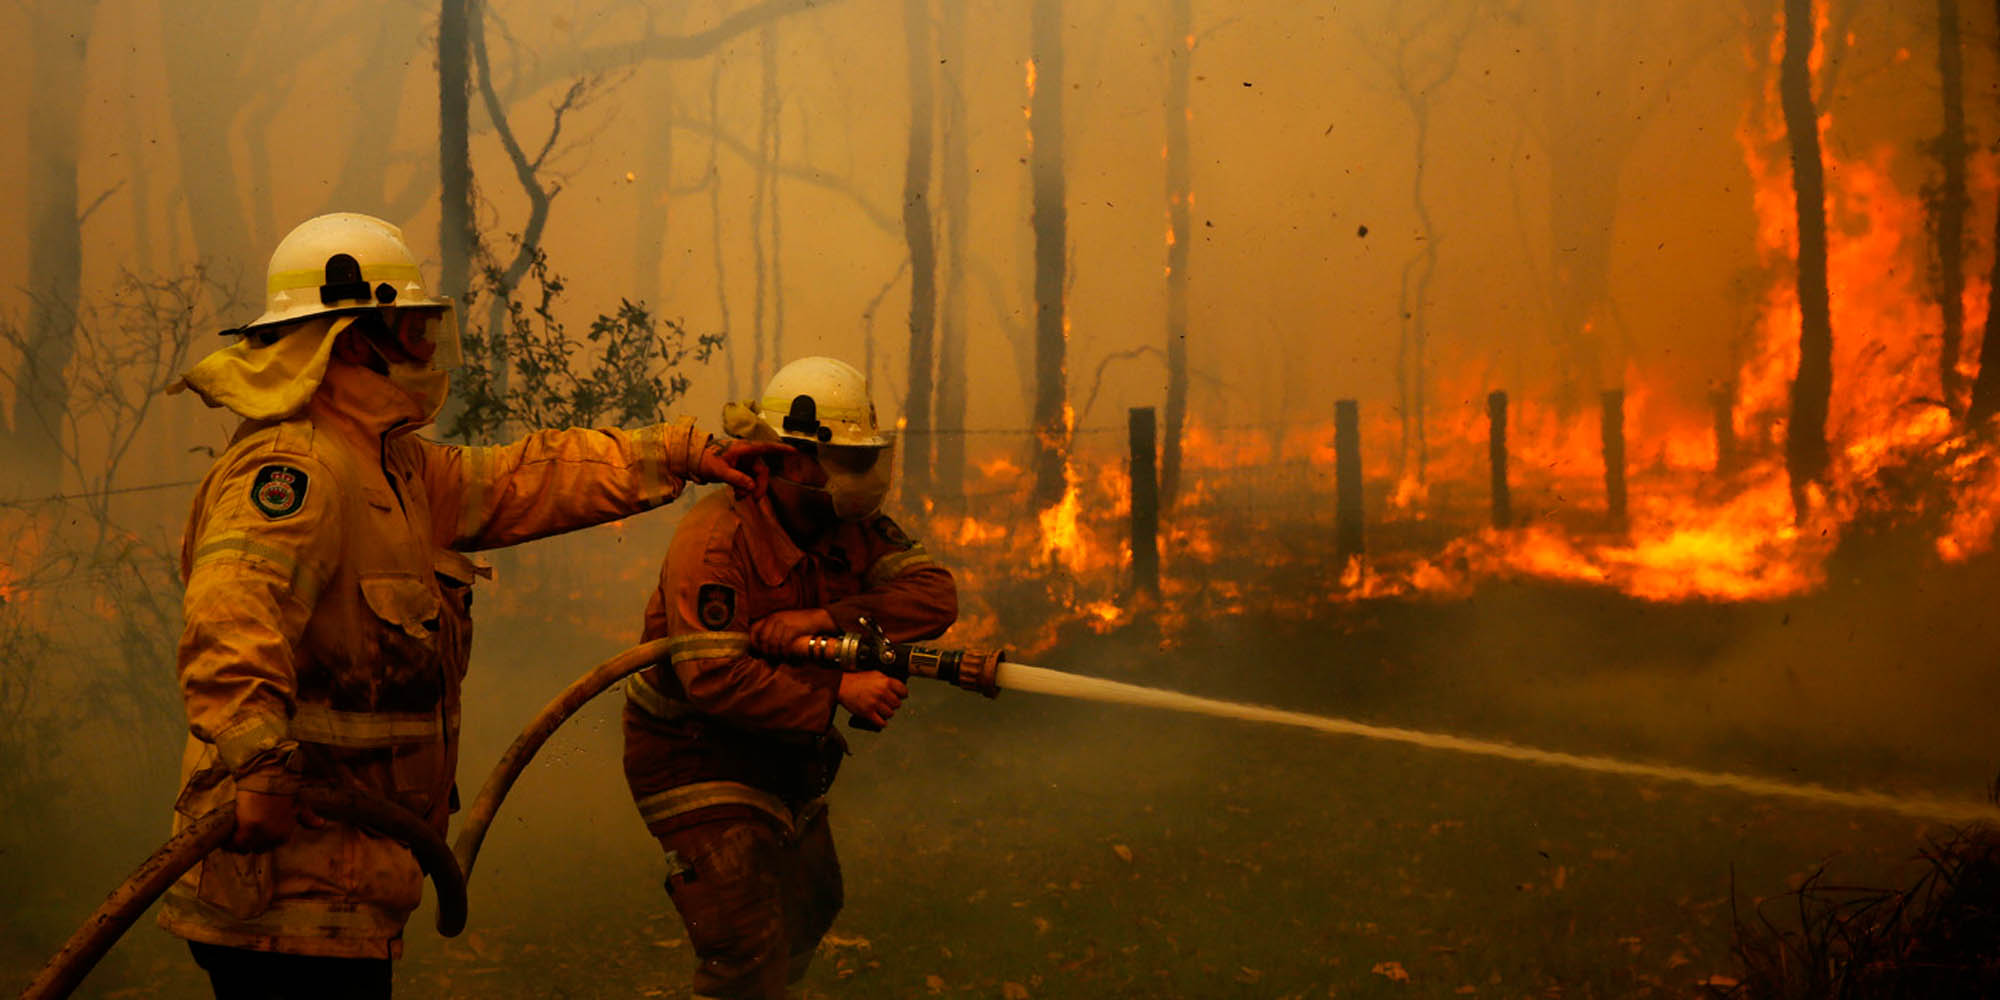 Bushfires in Australia and cause airport chaos